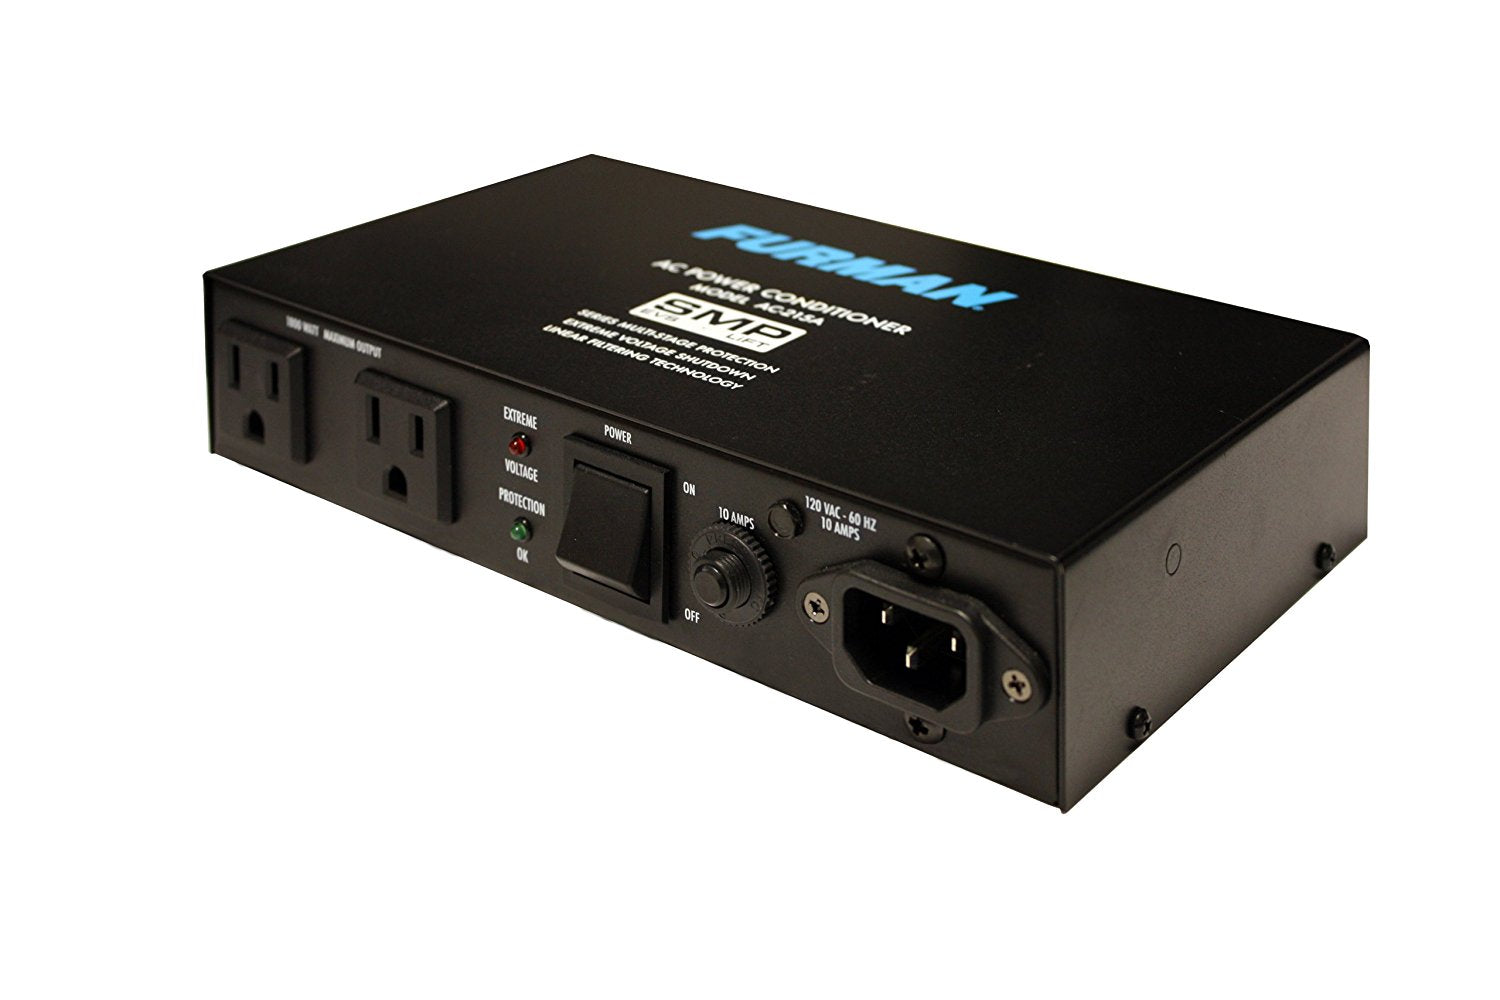 Furman AC-215A Compact Power Conditioner